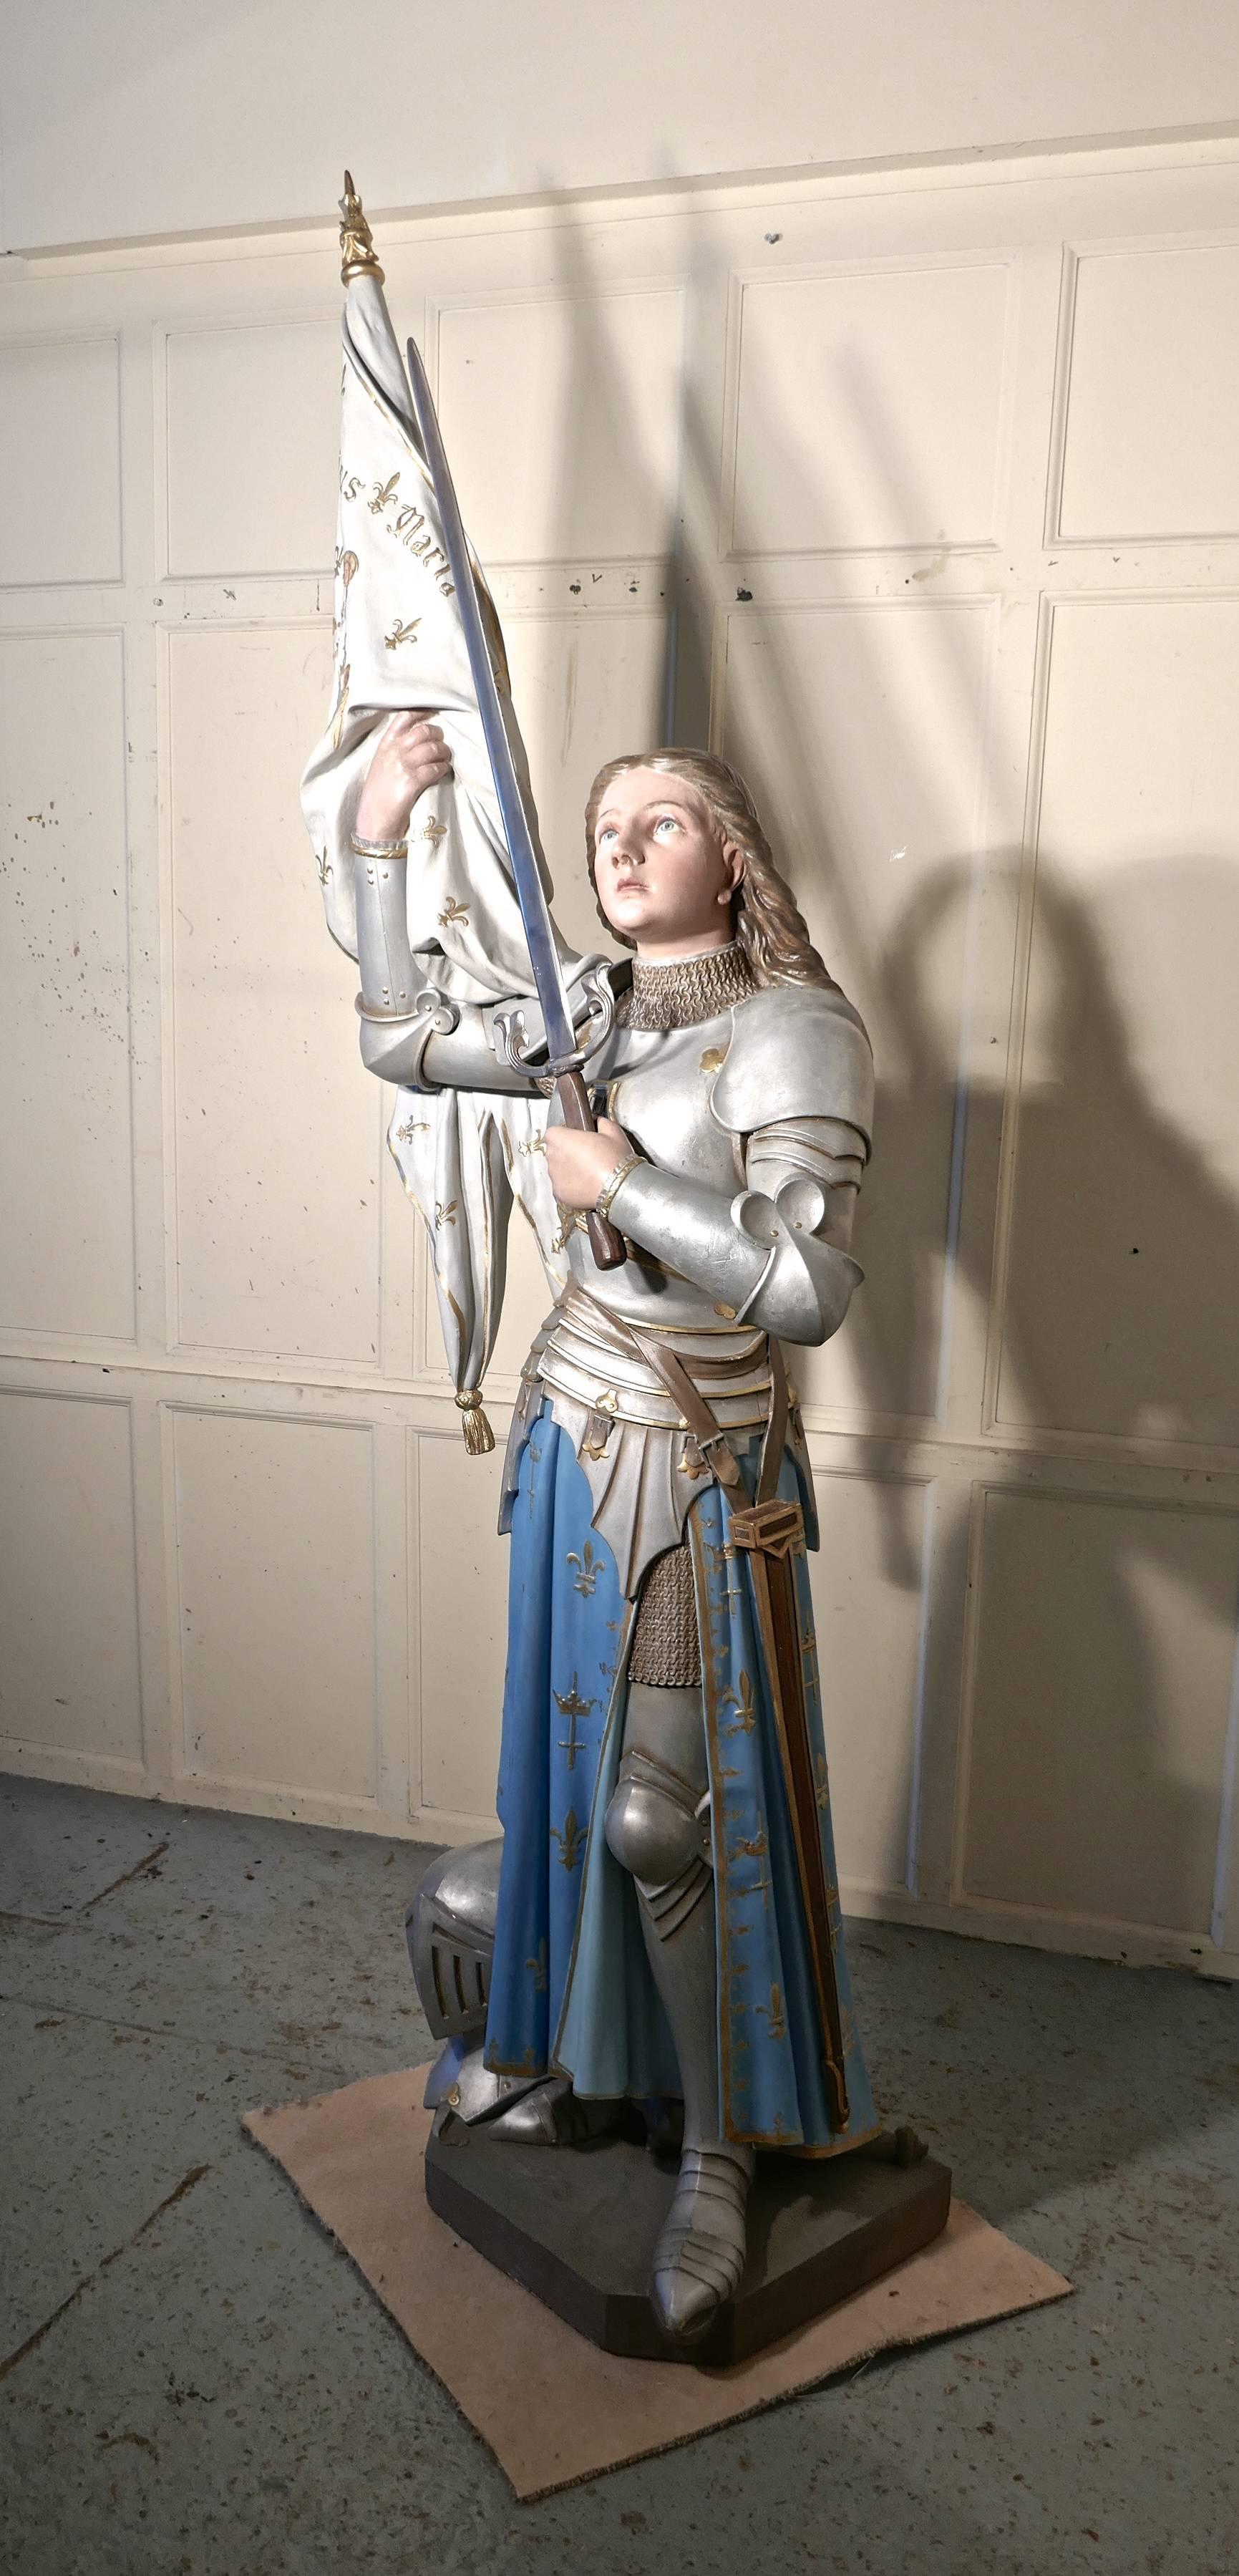 Lifesize sculpture, Joan of Arc from a French Cathedral 

We have a lifesize sculpture of St Joan in battle dress, this is an amazing piece, it dates from the middle of the 19th century and shows the saint in battle dress holding on high the